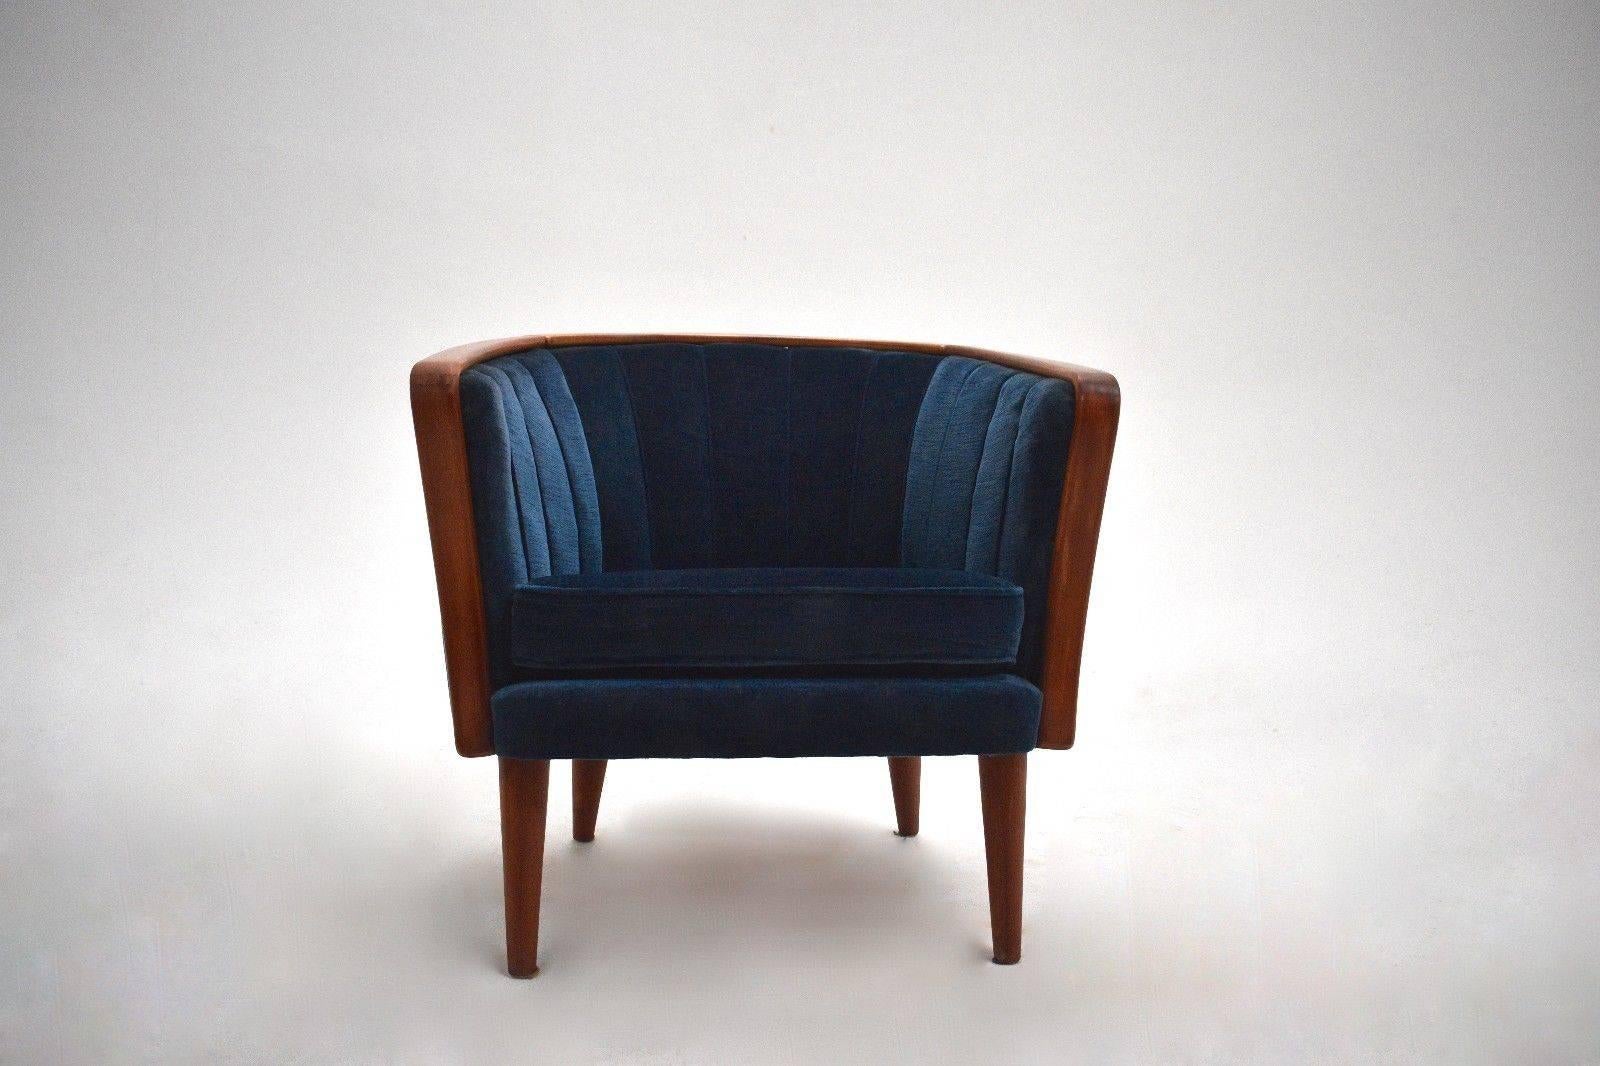 A beautiful Norwegian navy blue velvet club armchair, this would make a stylish addition to any living or work area. The chair has a curved backrest and sculptured wooden armrests for enhanced comfort. A striking piece of Classic Scandinavian